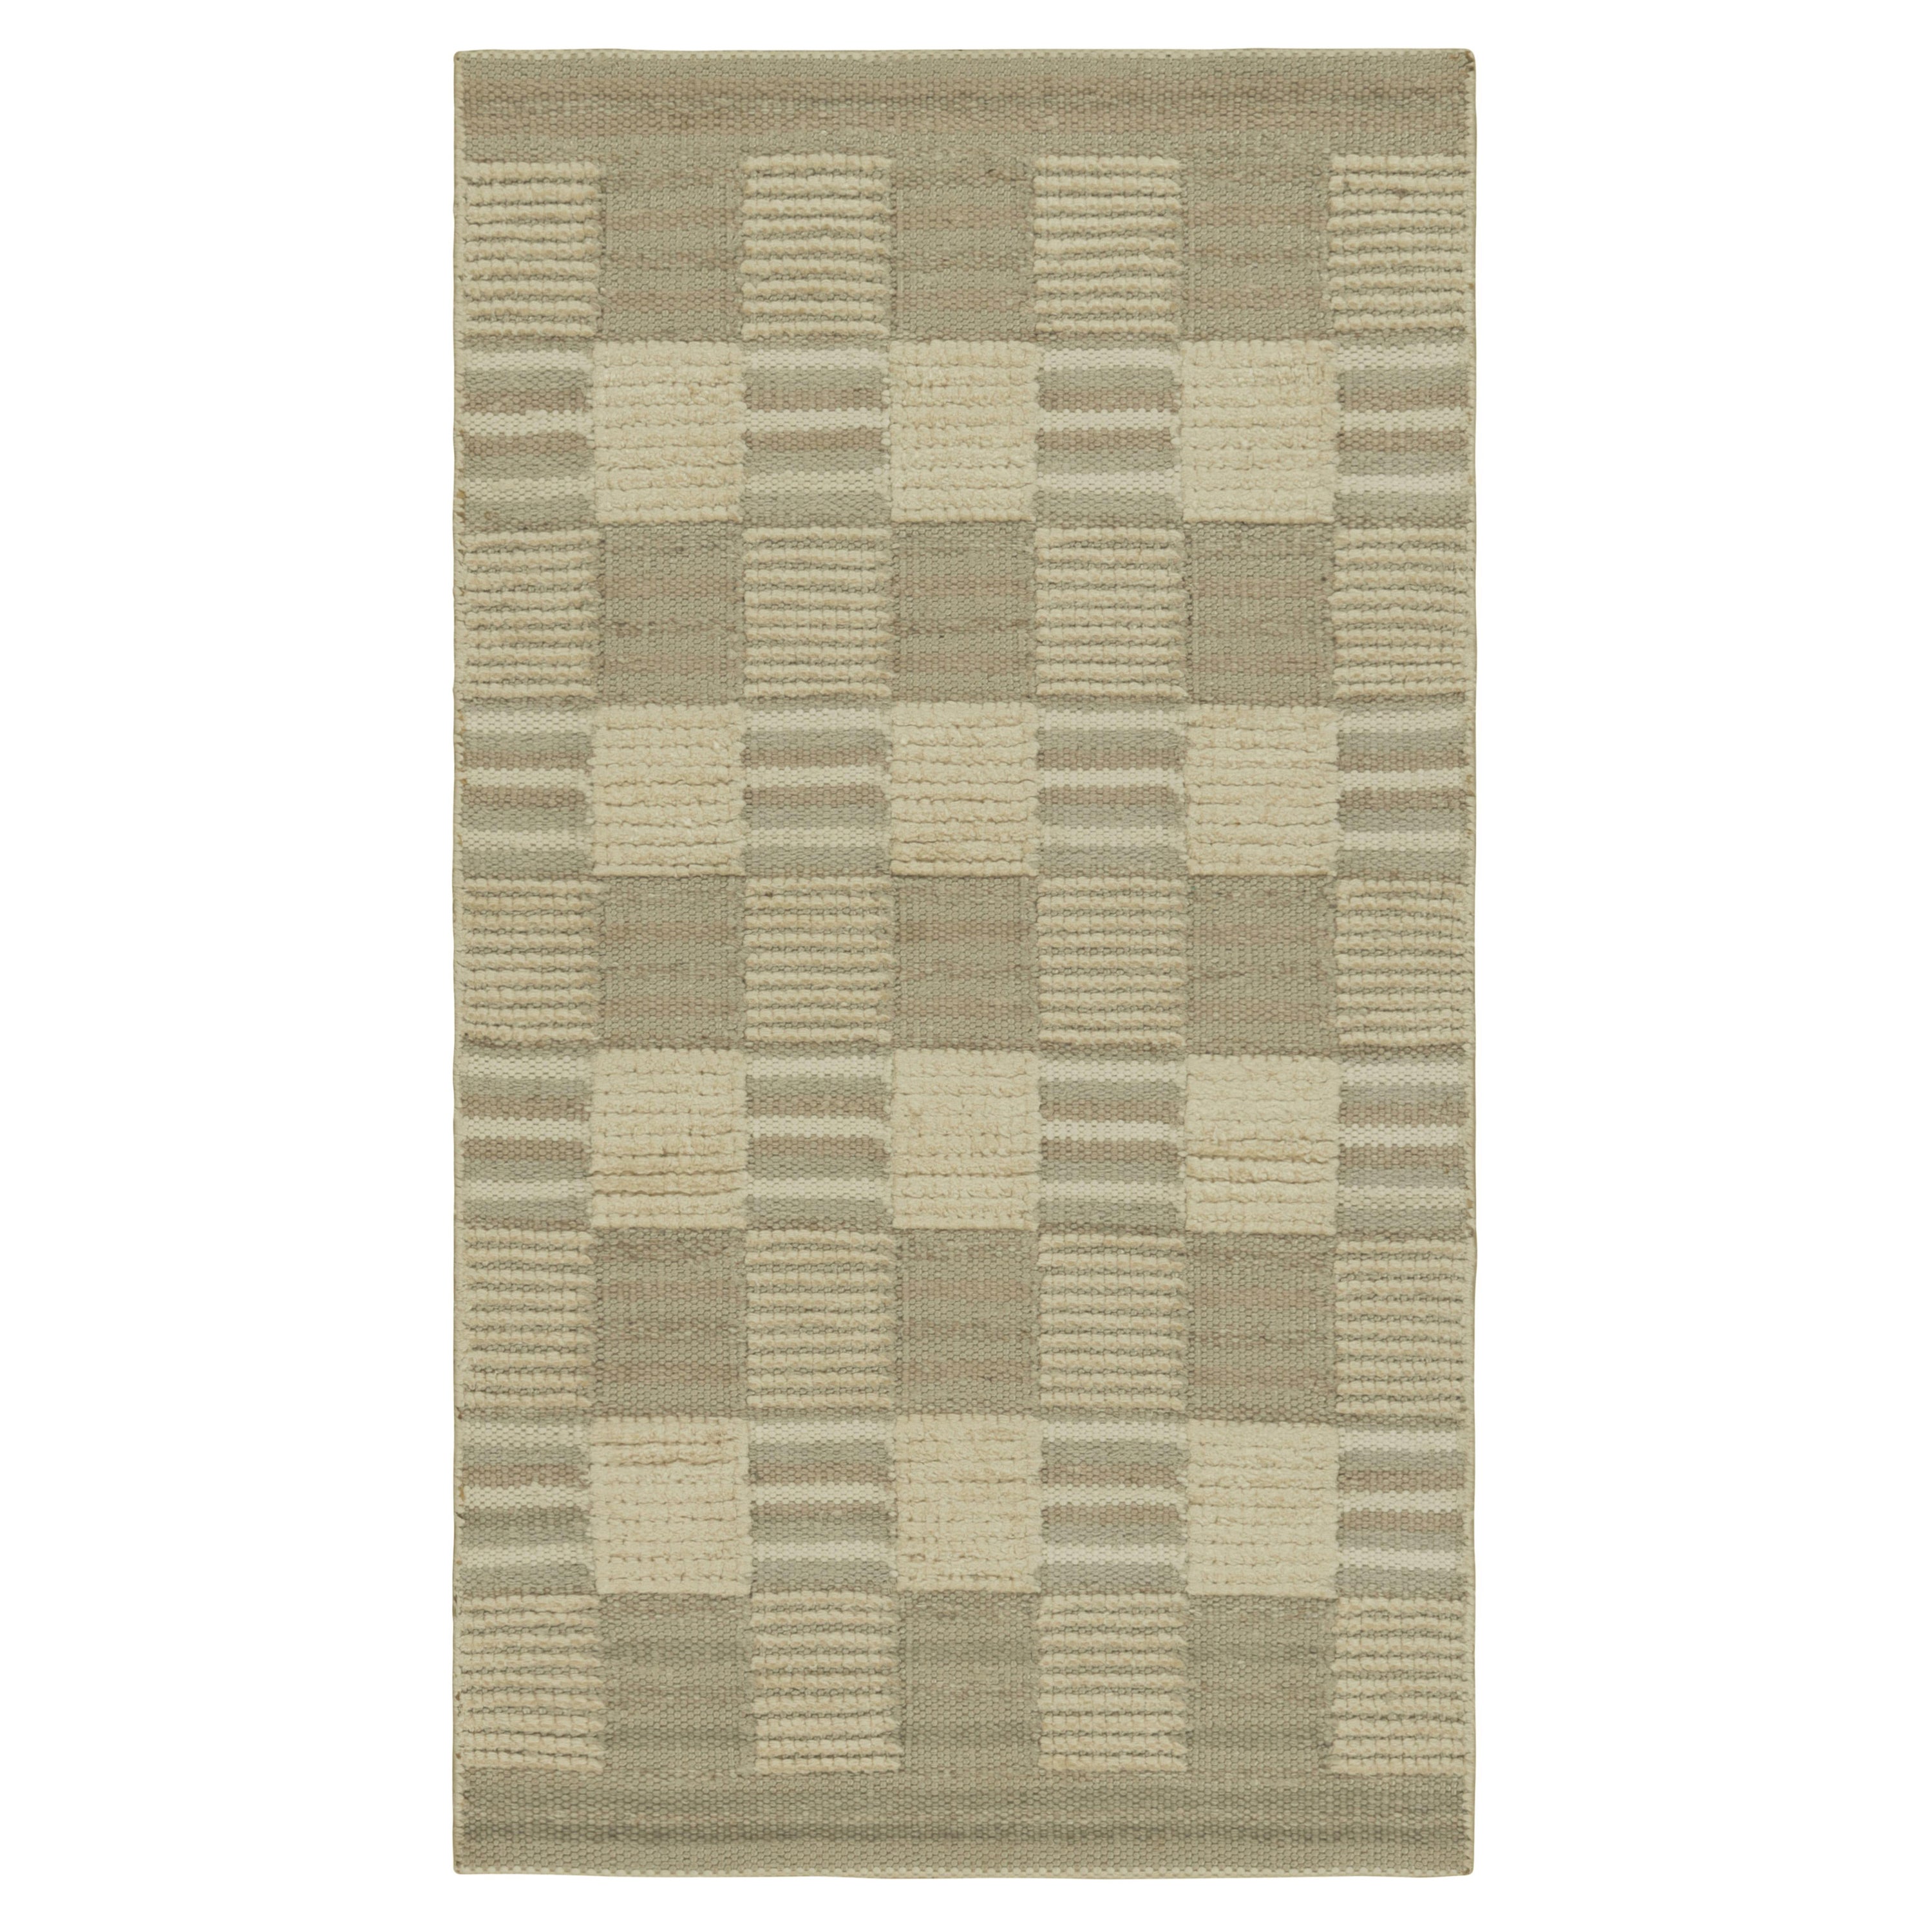 Rug & Kilim’s Scandinavian Style Rug in Blue and Beige, with Geometric Patterns For Sale